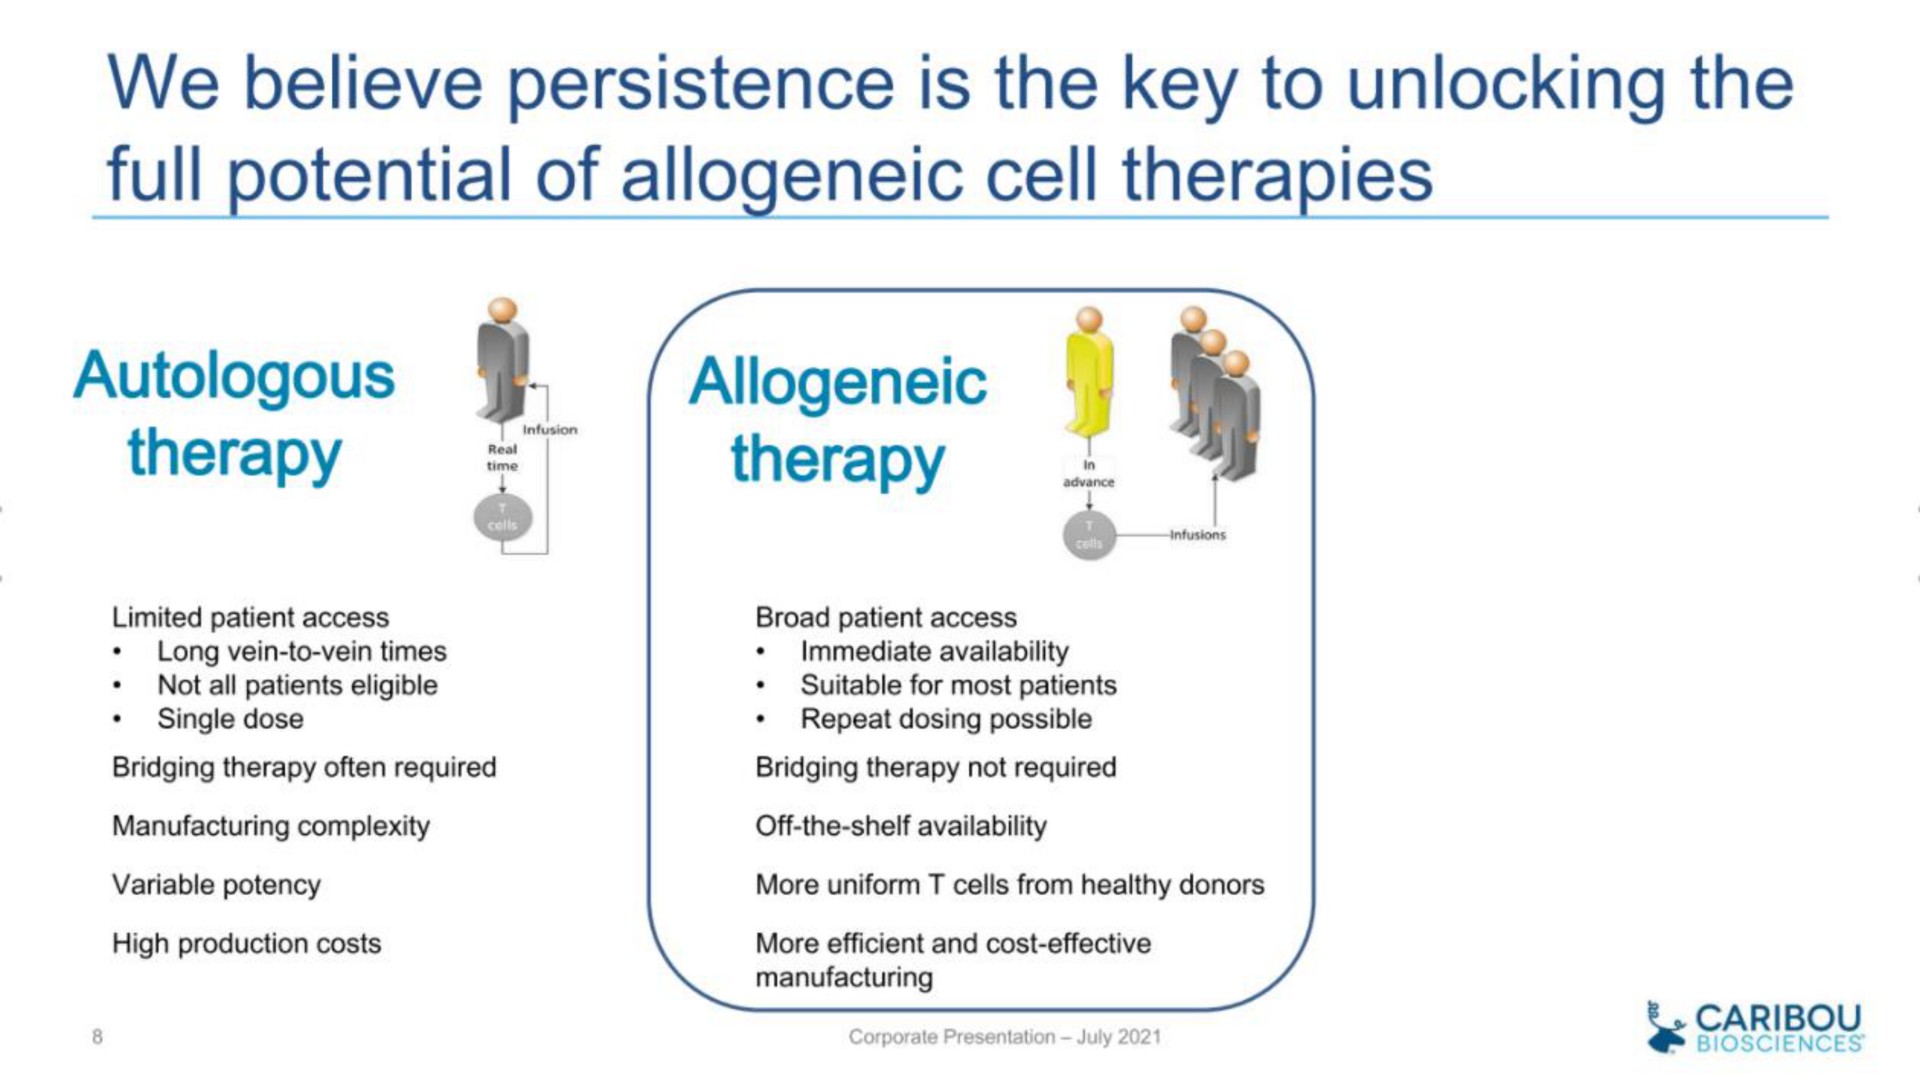 we believe persistence is the key to unlocking the full potential of cell therapies | Caribou Biosciences